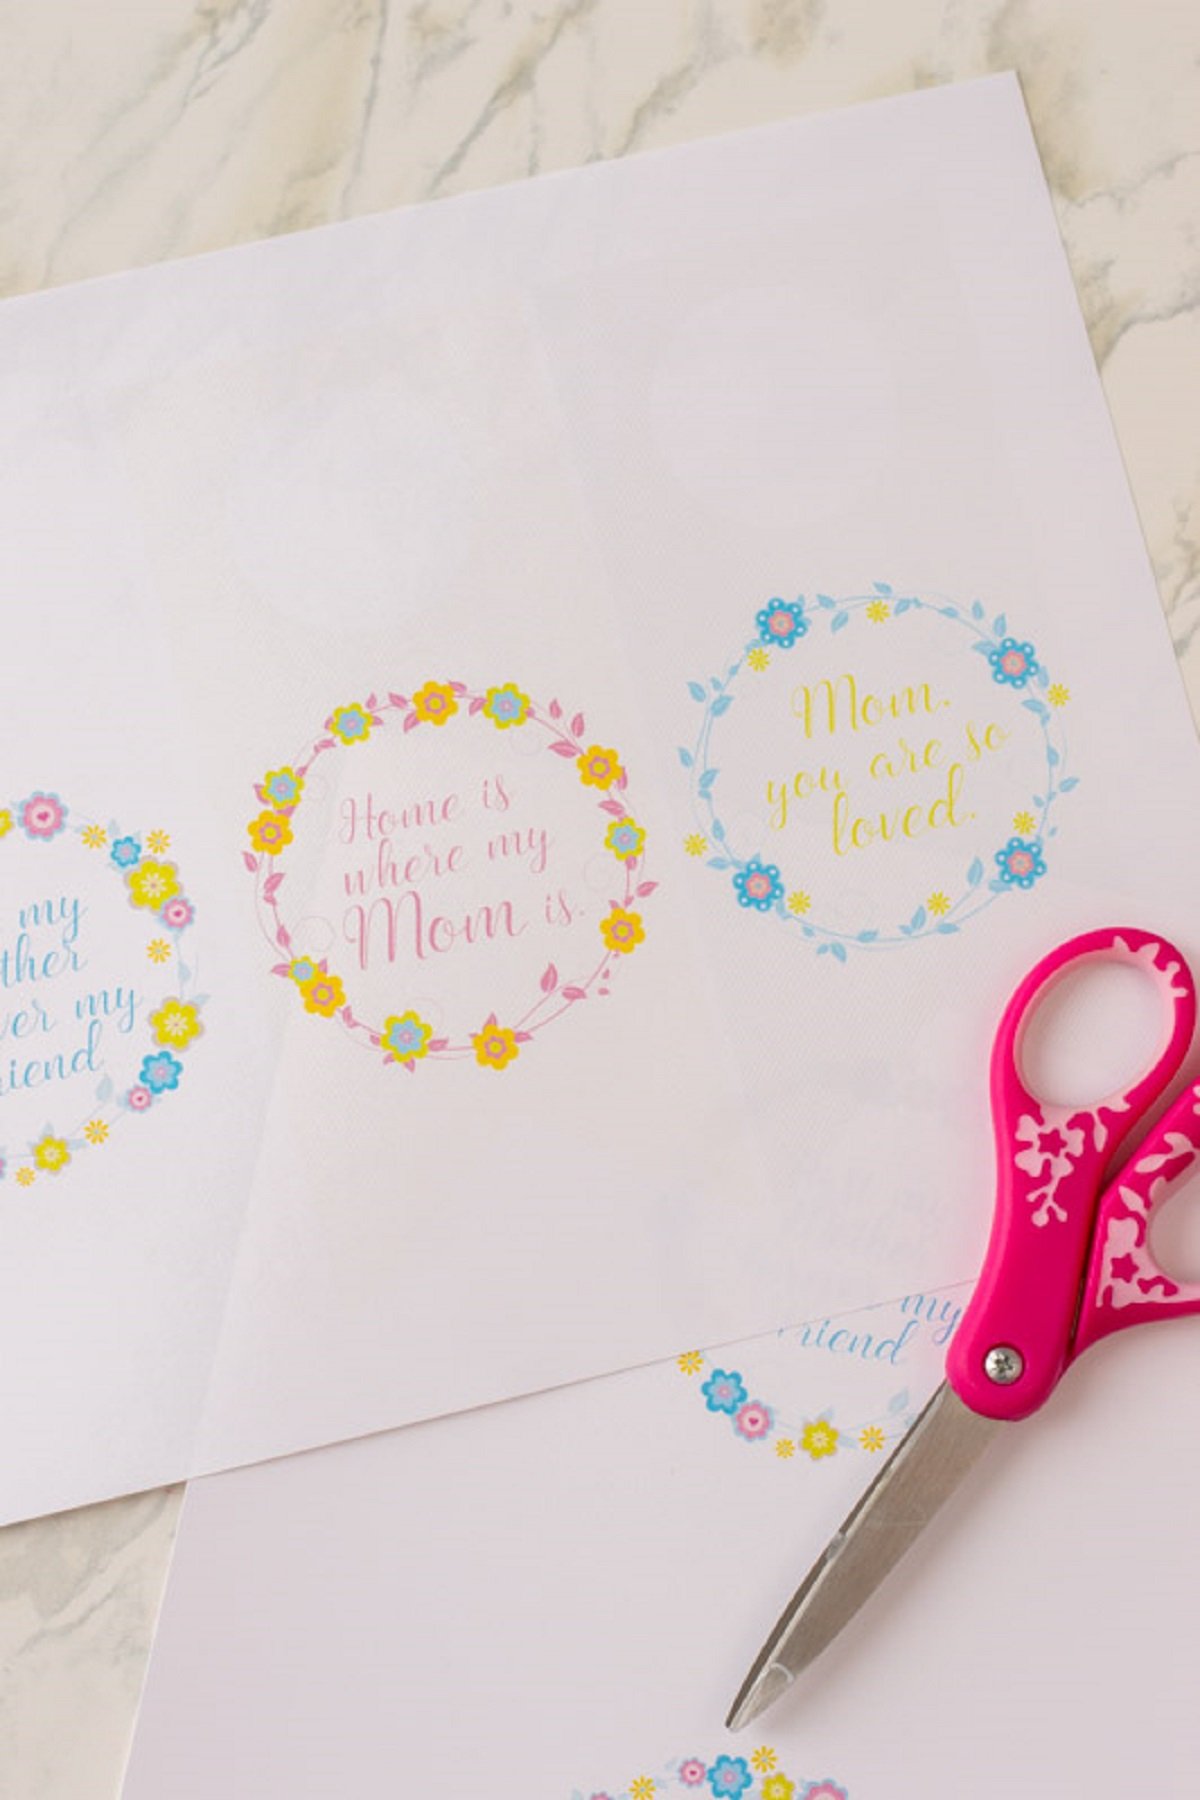 wine bottle tag printables and scissors